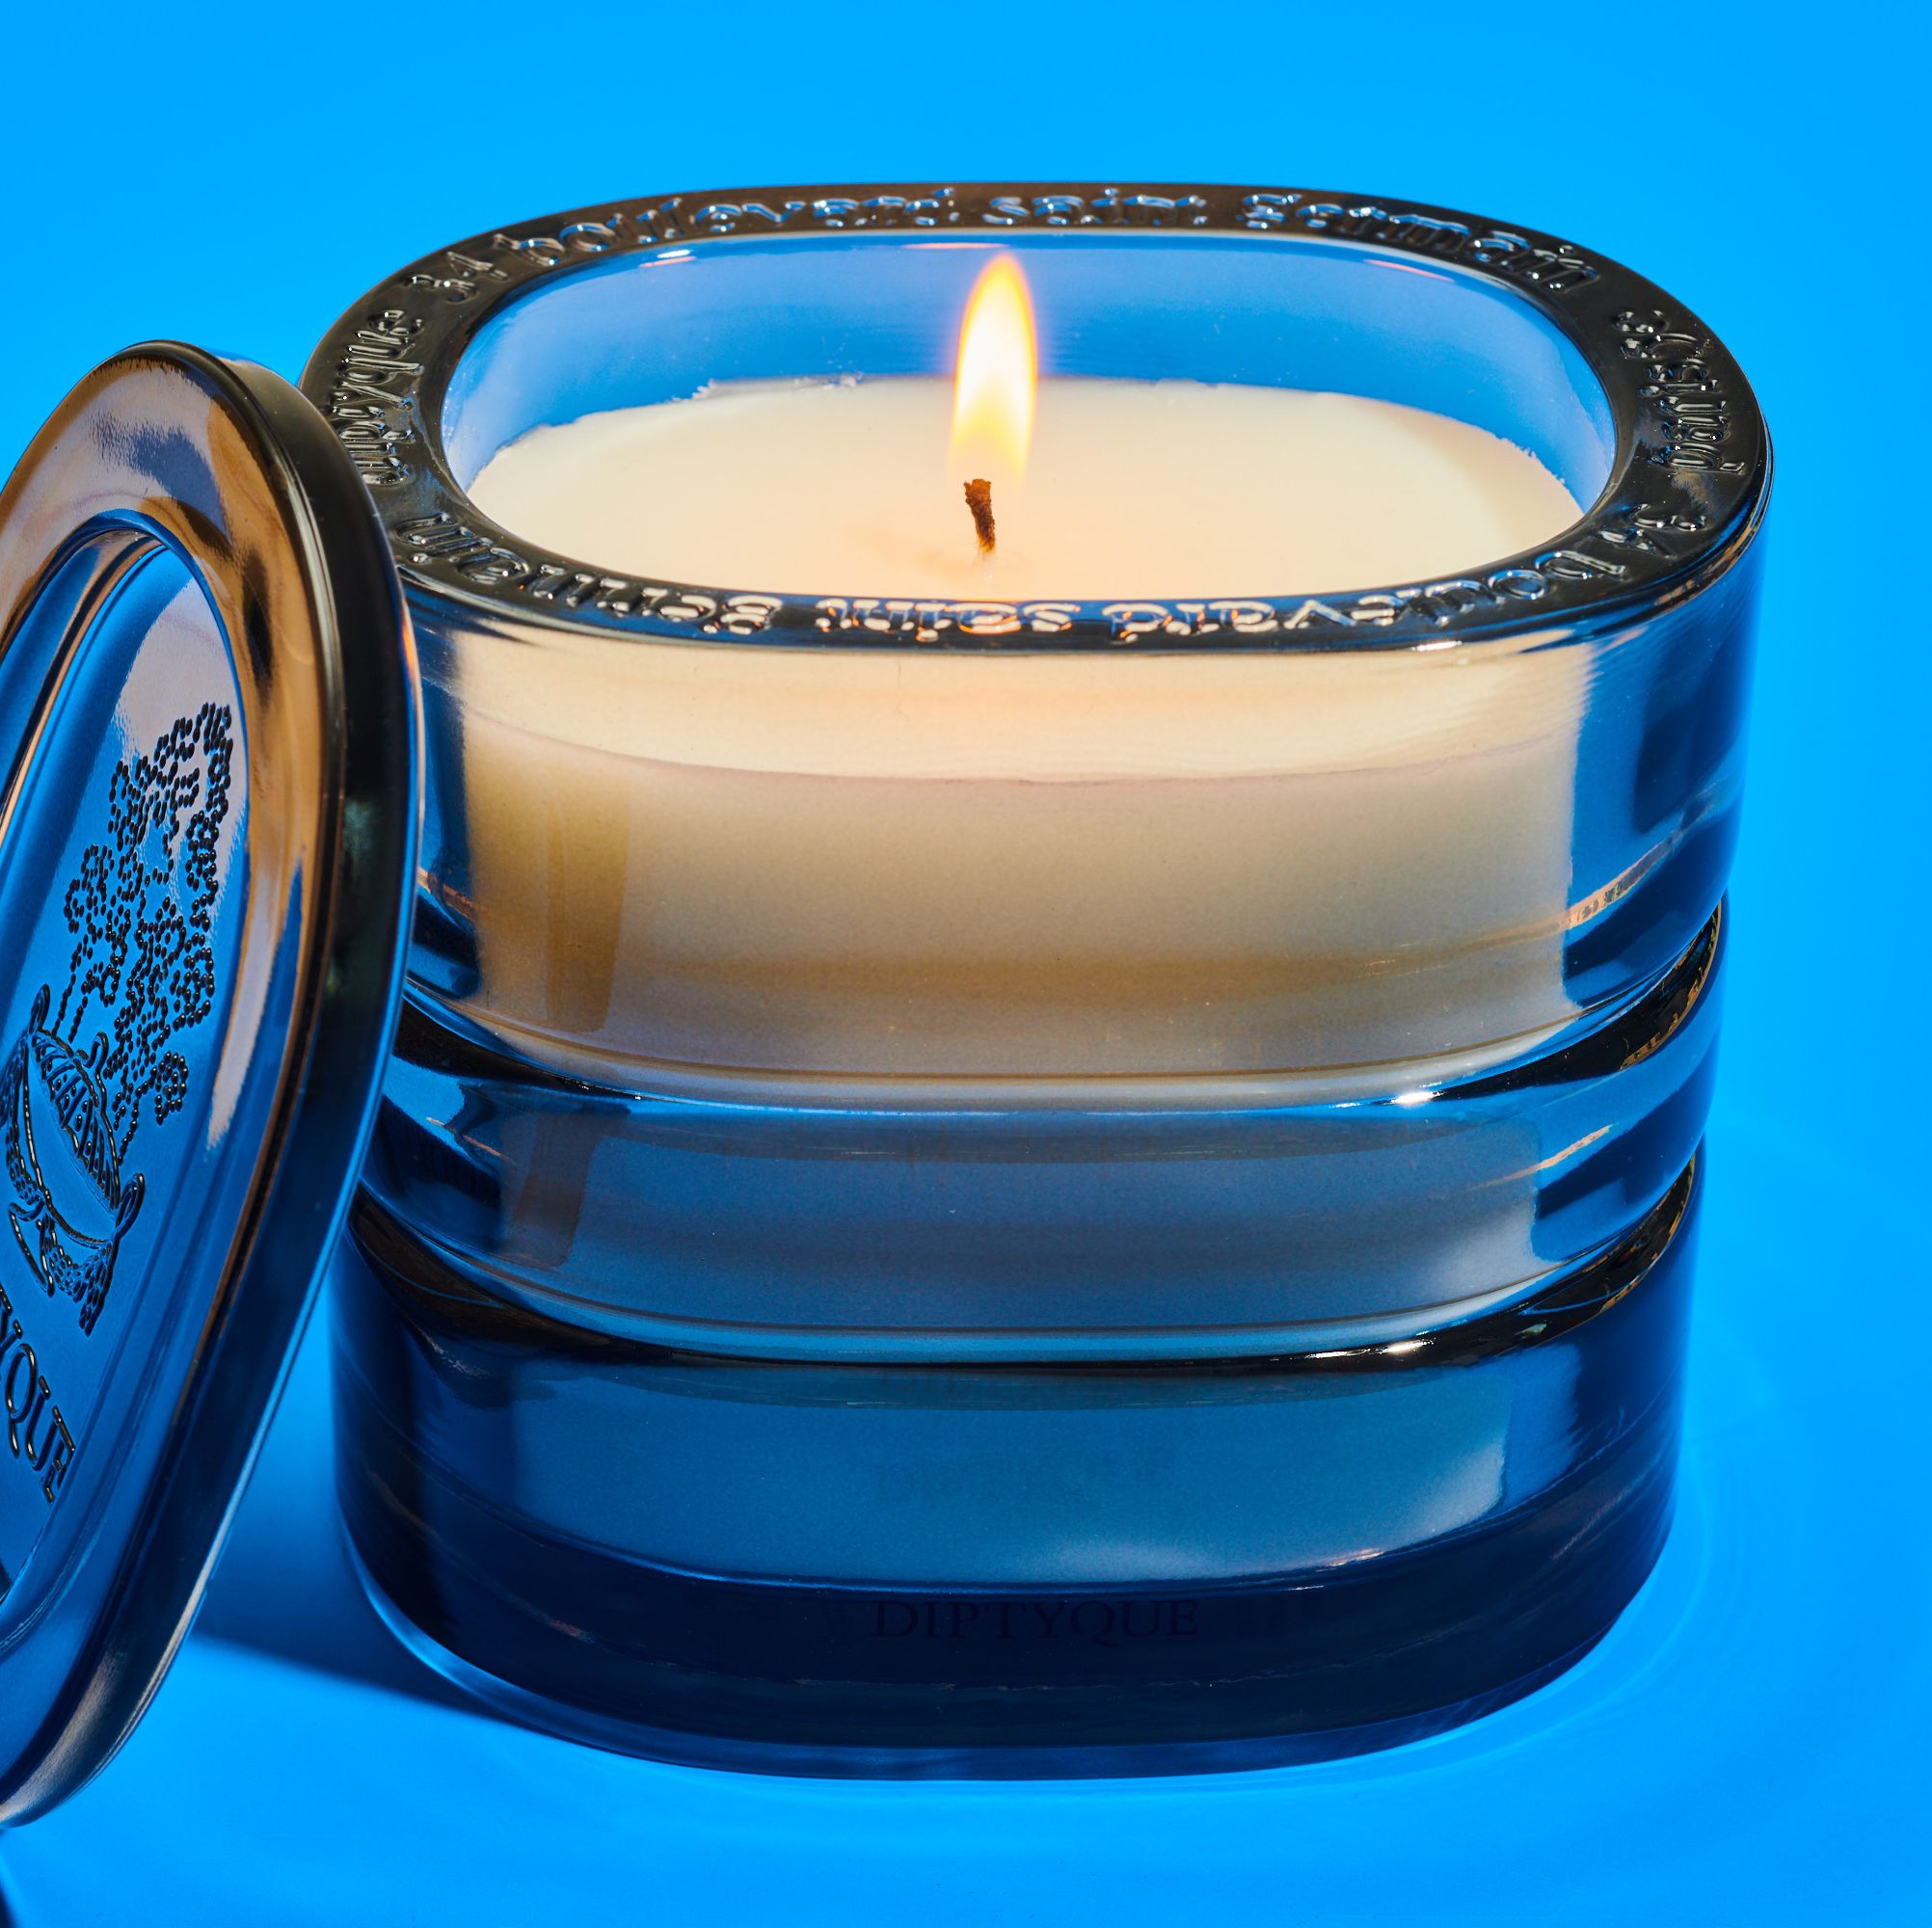 A Candle Made to Last a Lifetime